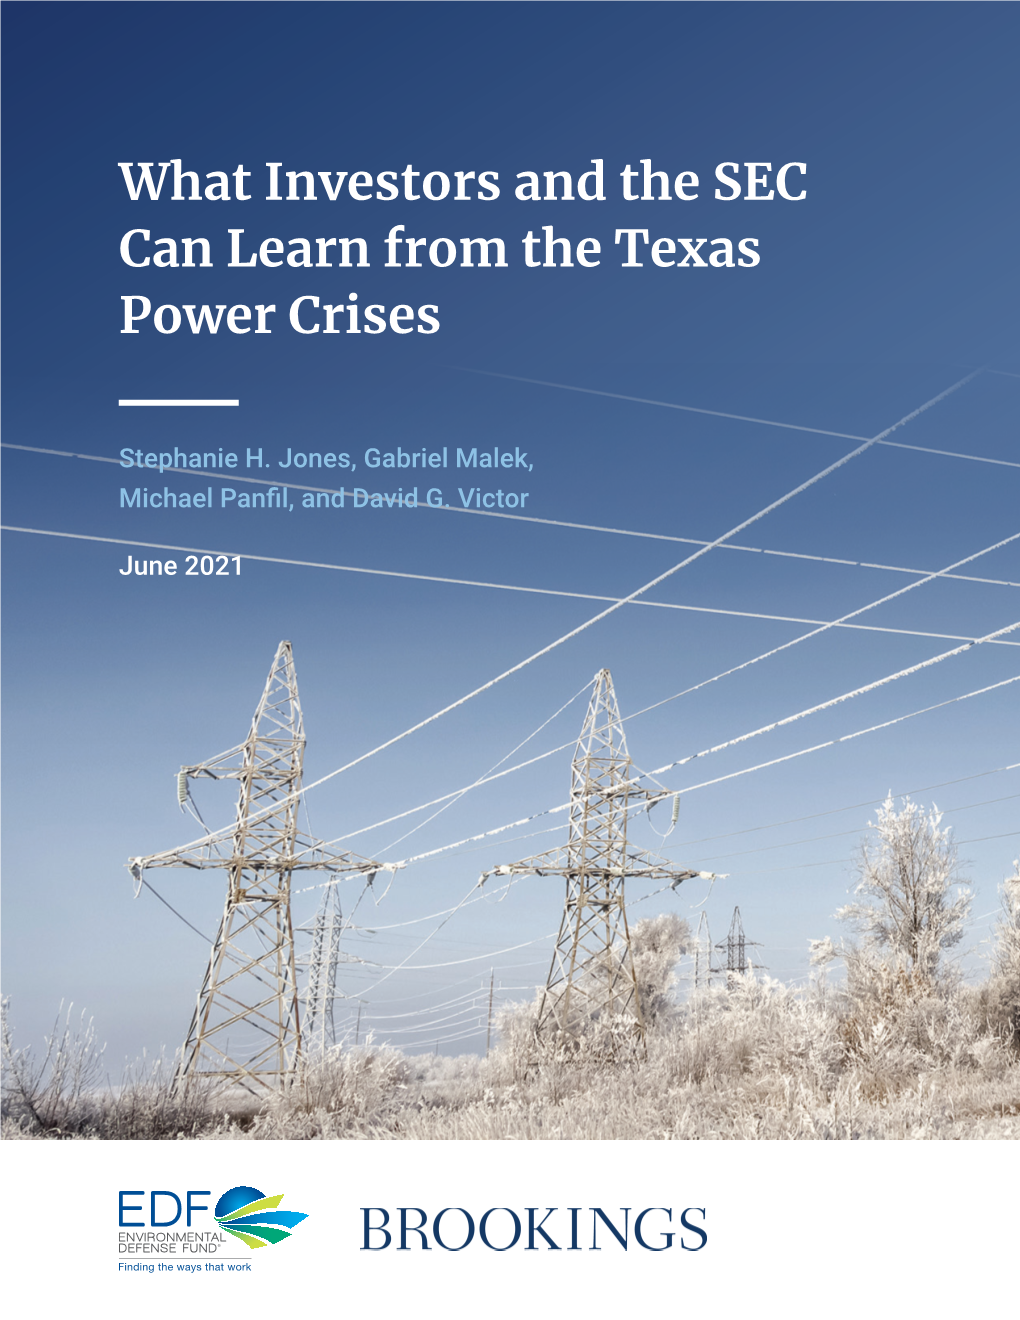 What Investors and the SEC Can Learn from the Texas Power Crises